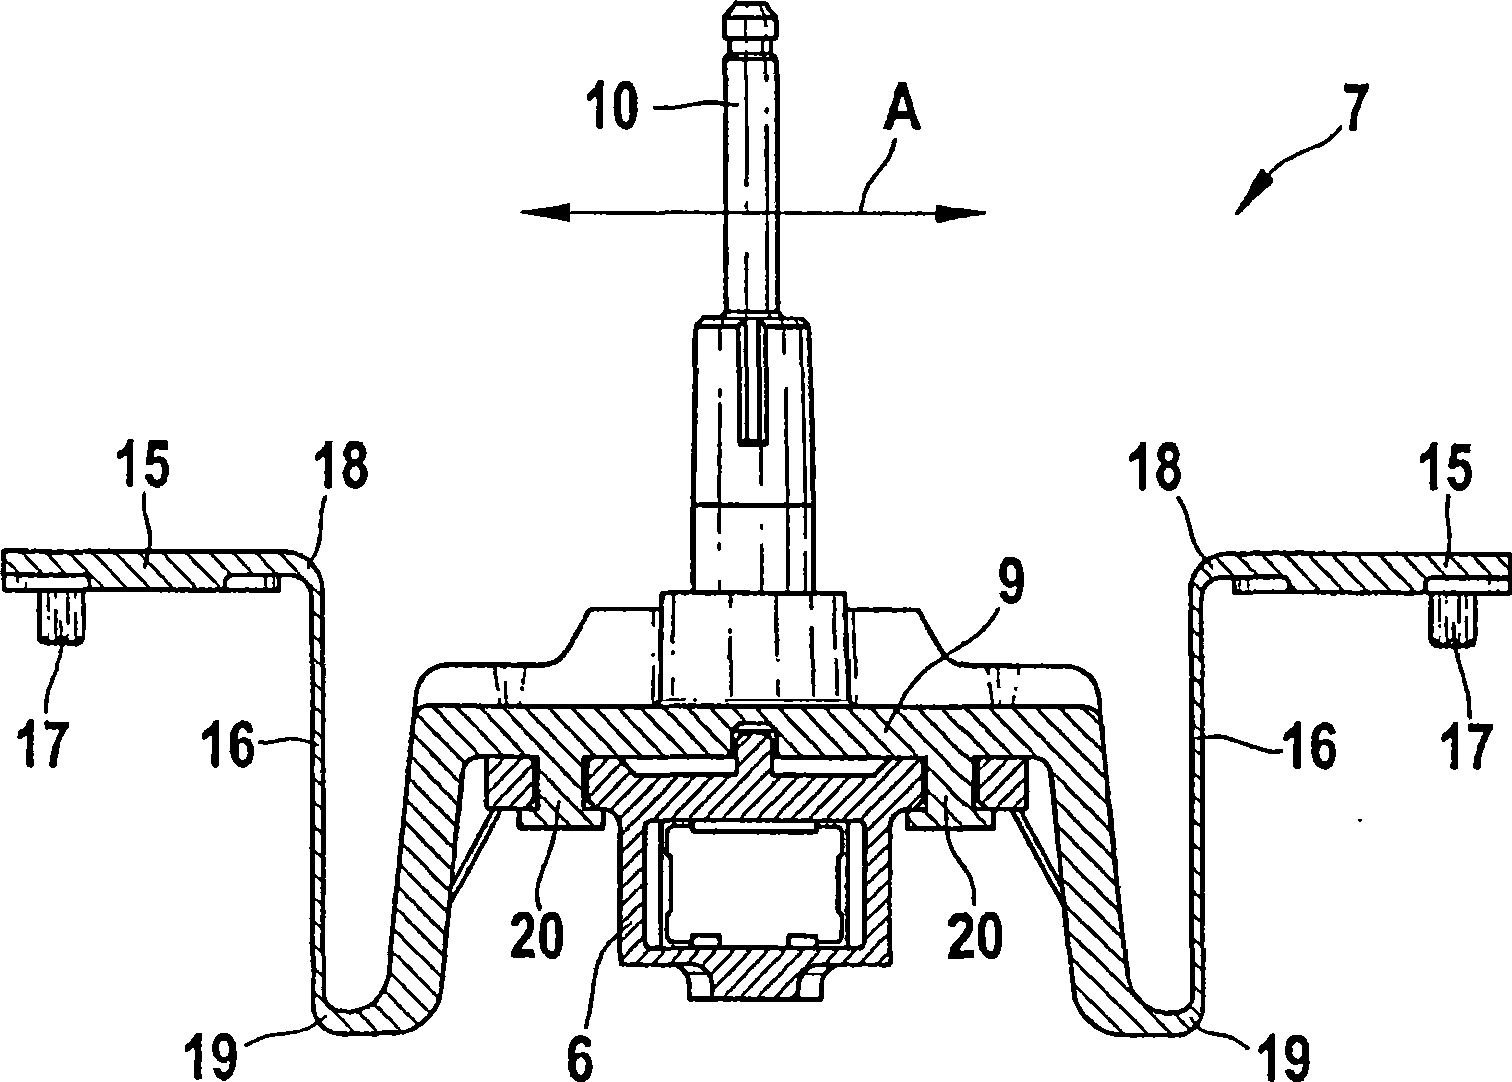 Swing bridge for converting a rotary motion into an oscillating motion and use of same in an electrical device